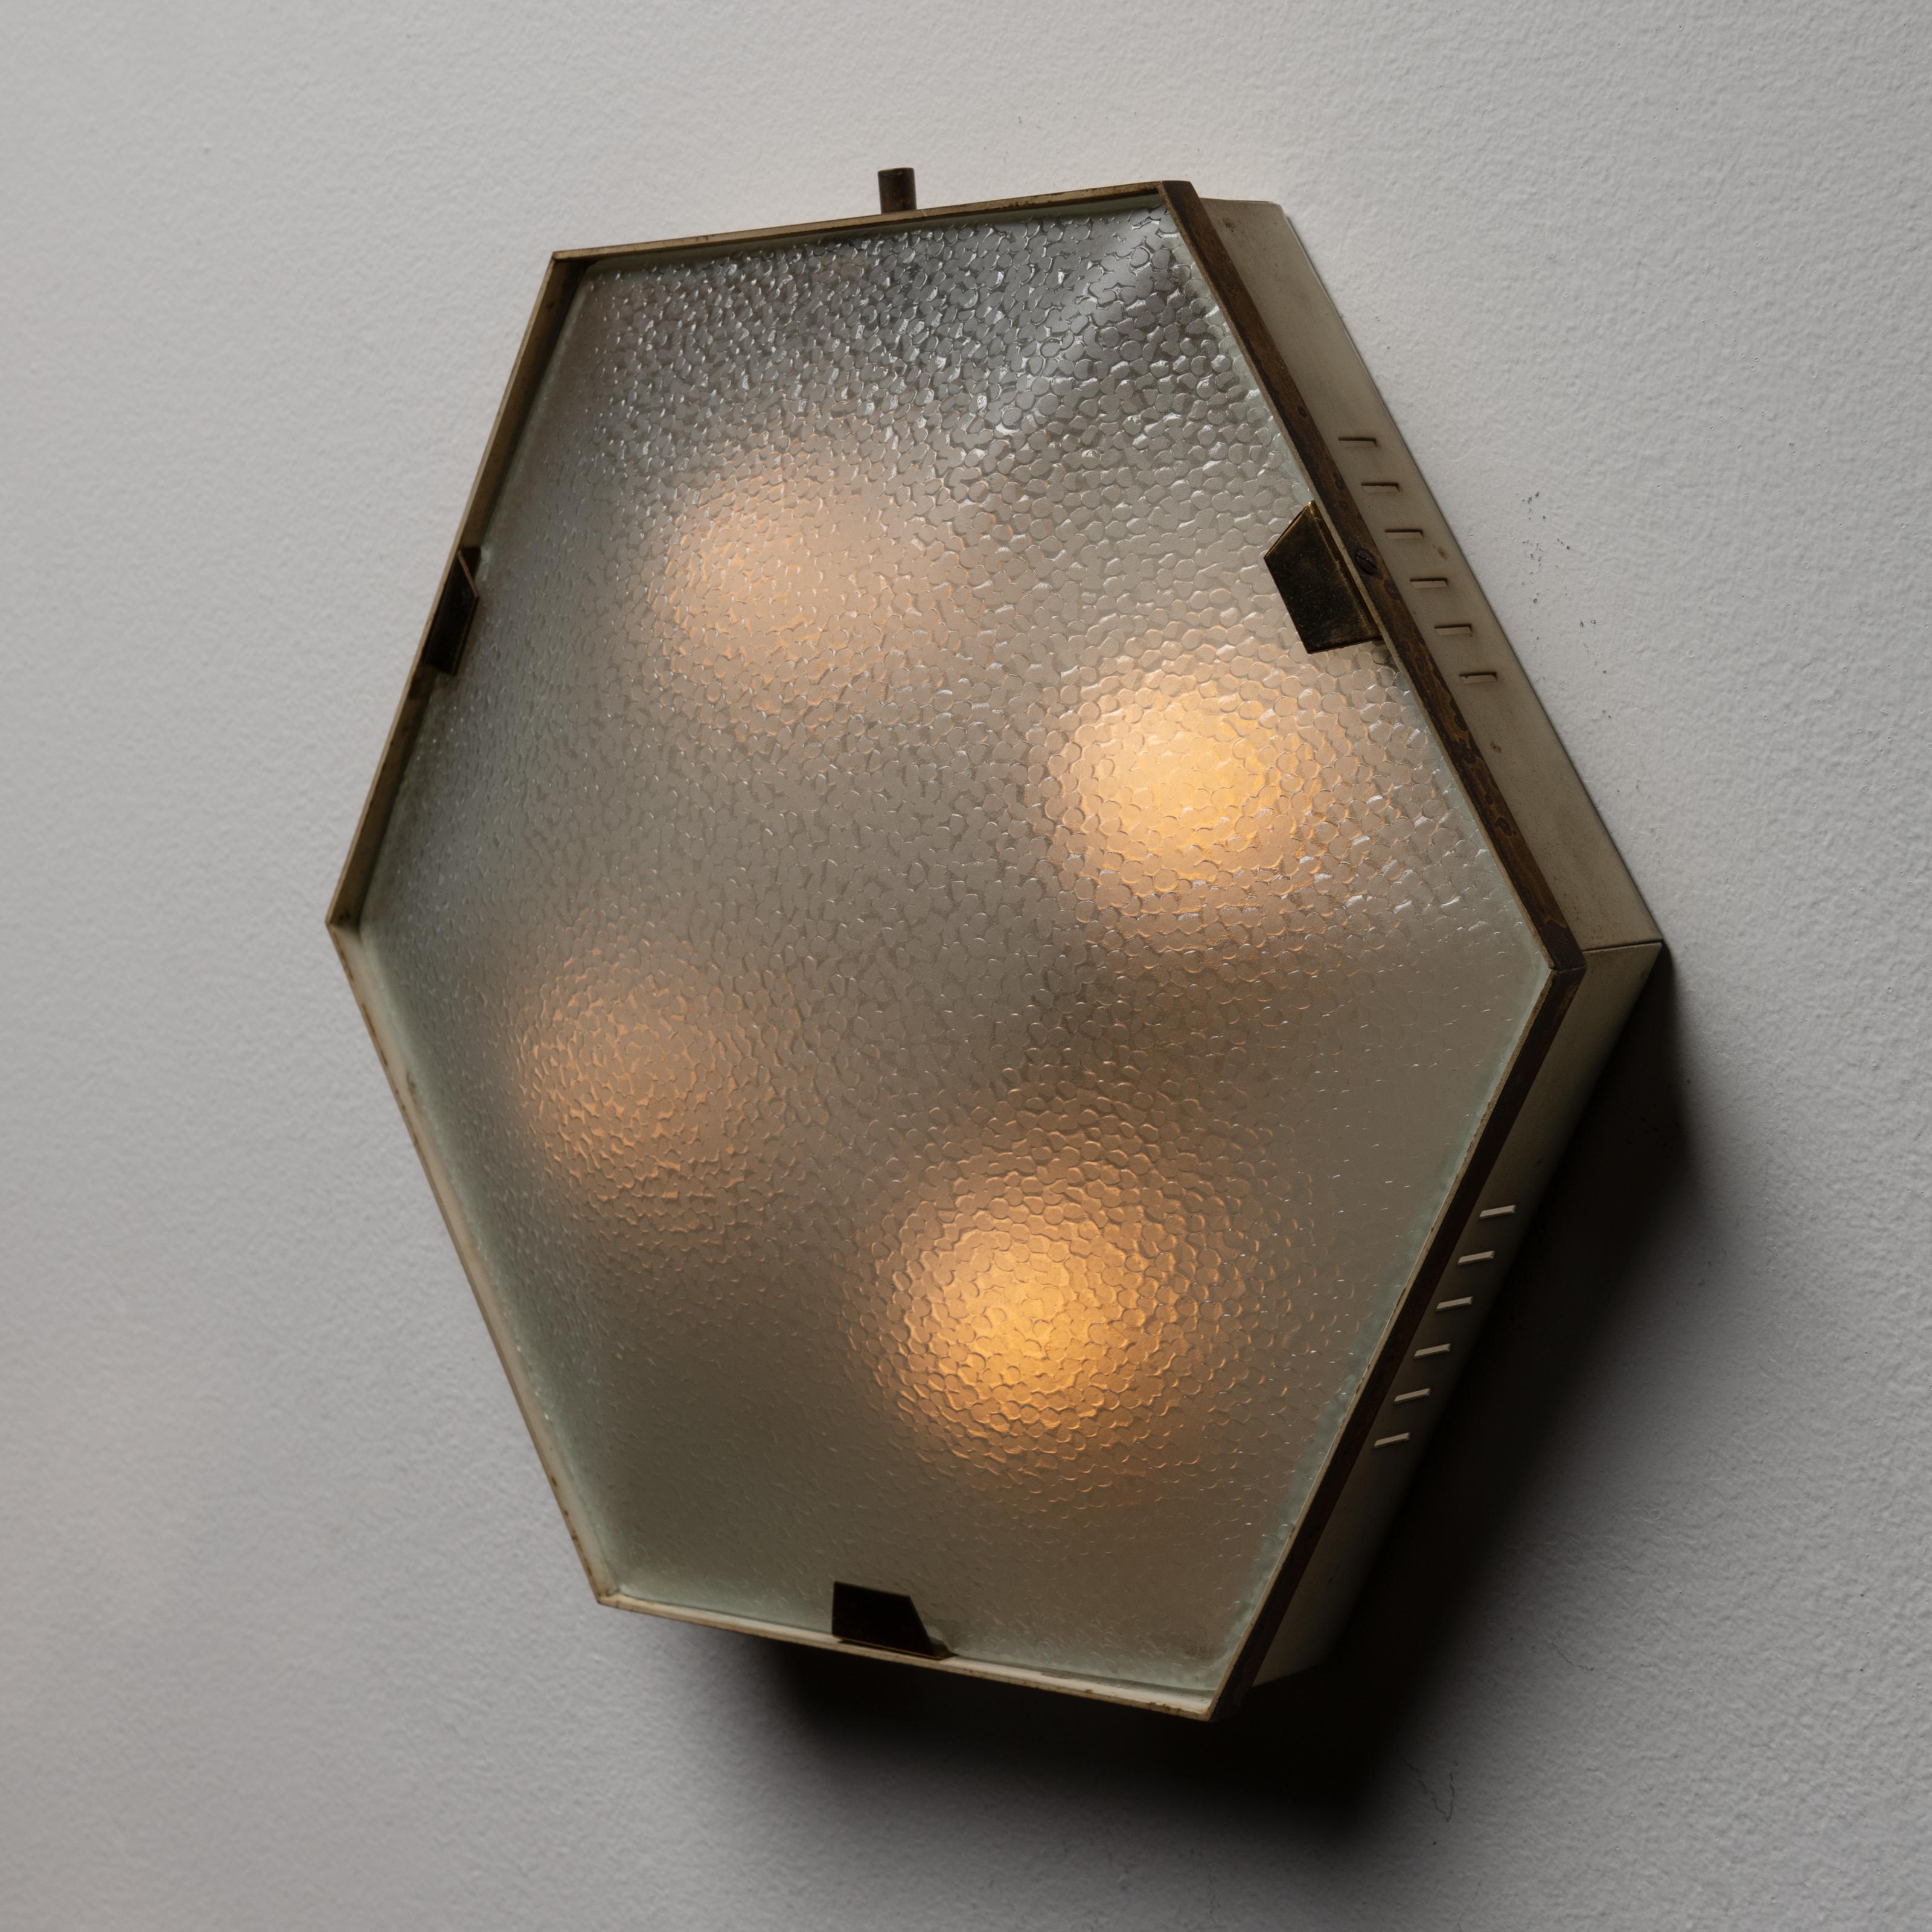 Flushmount by Stilnovo. Designed and manufactured in Italy, circa 1950. Stunning Stilnovo flush mounts, composed of minimal brass frames and shades made from textured glass. We recommend using 40w maximum E14 bulbs. Rewired for US standards. Bulbs